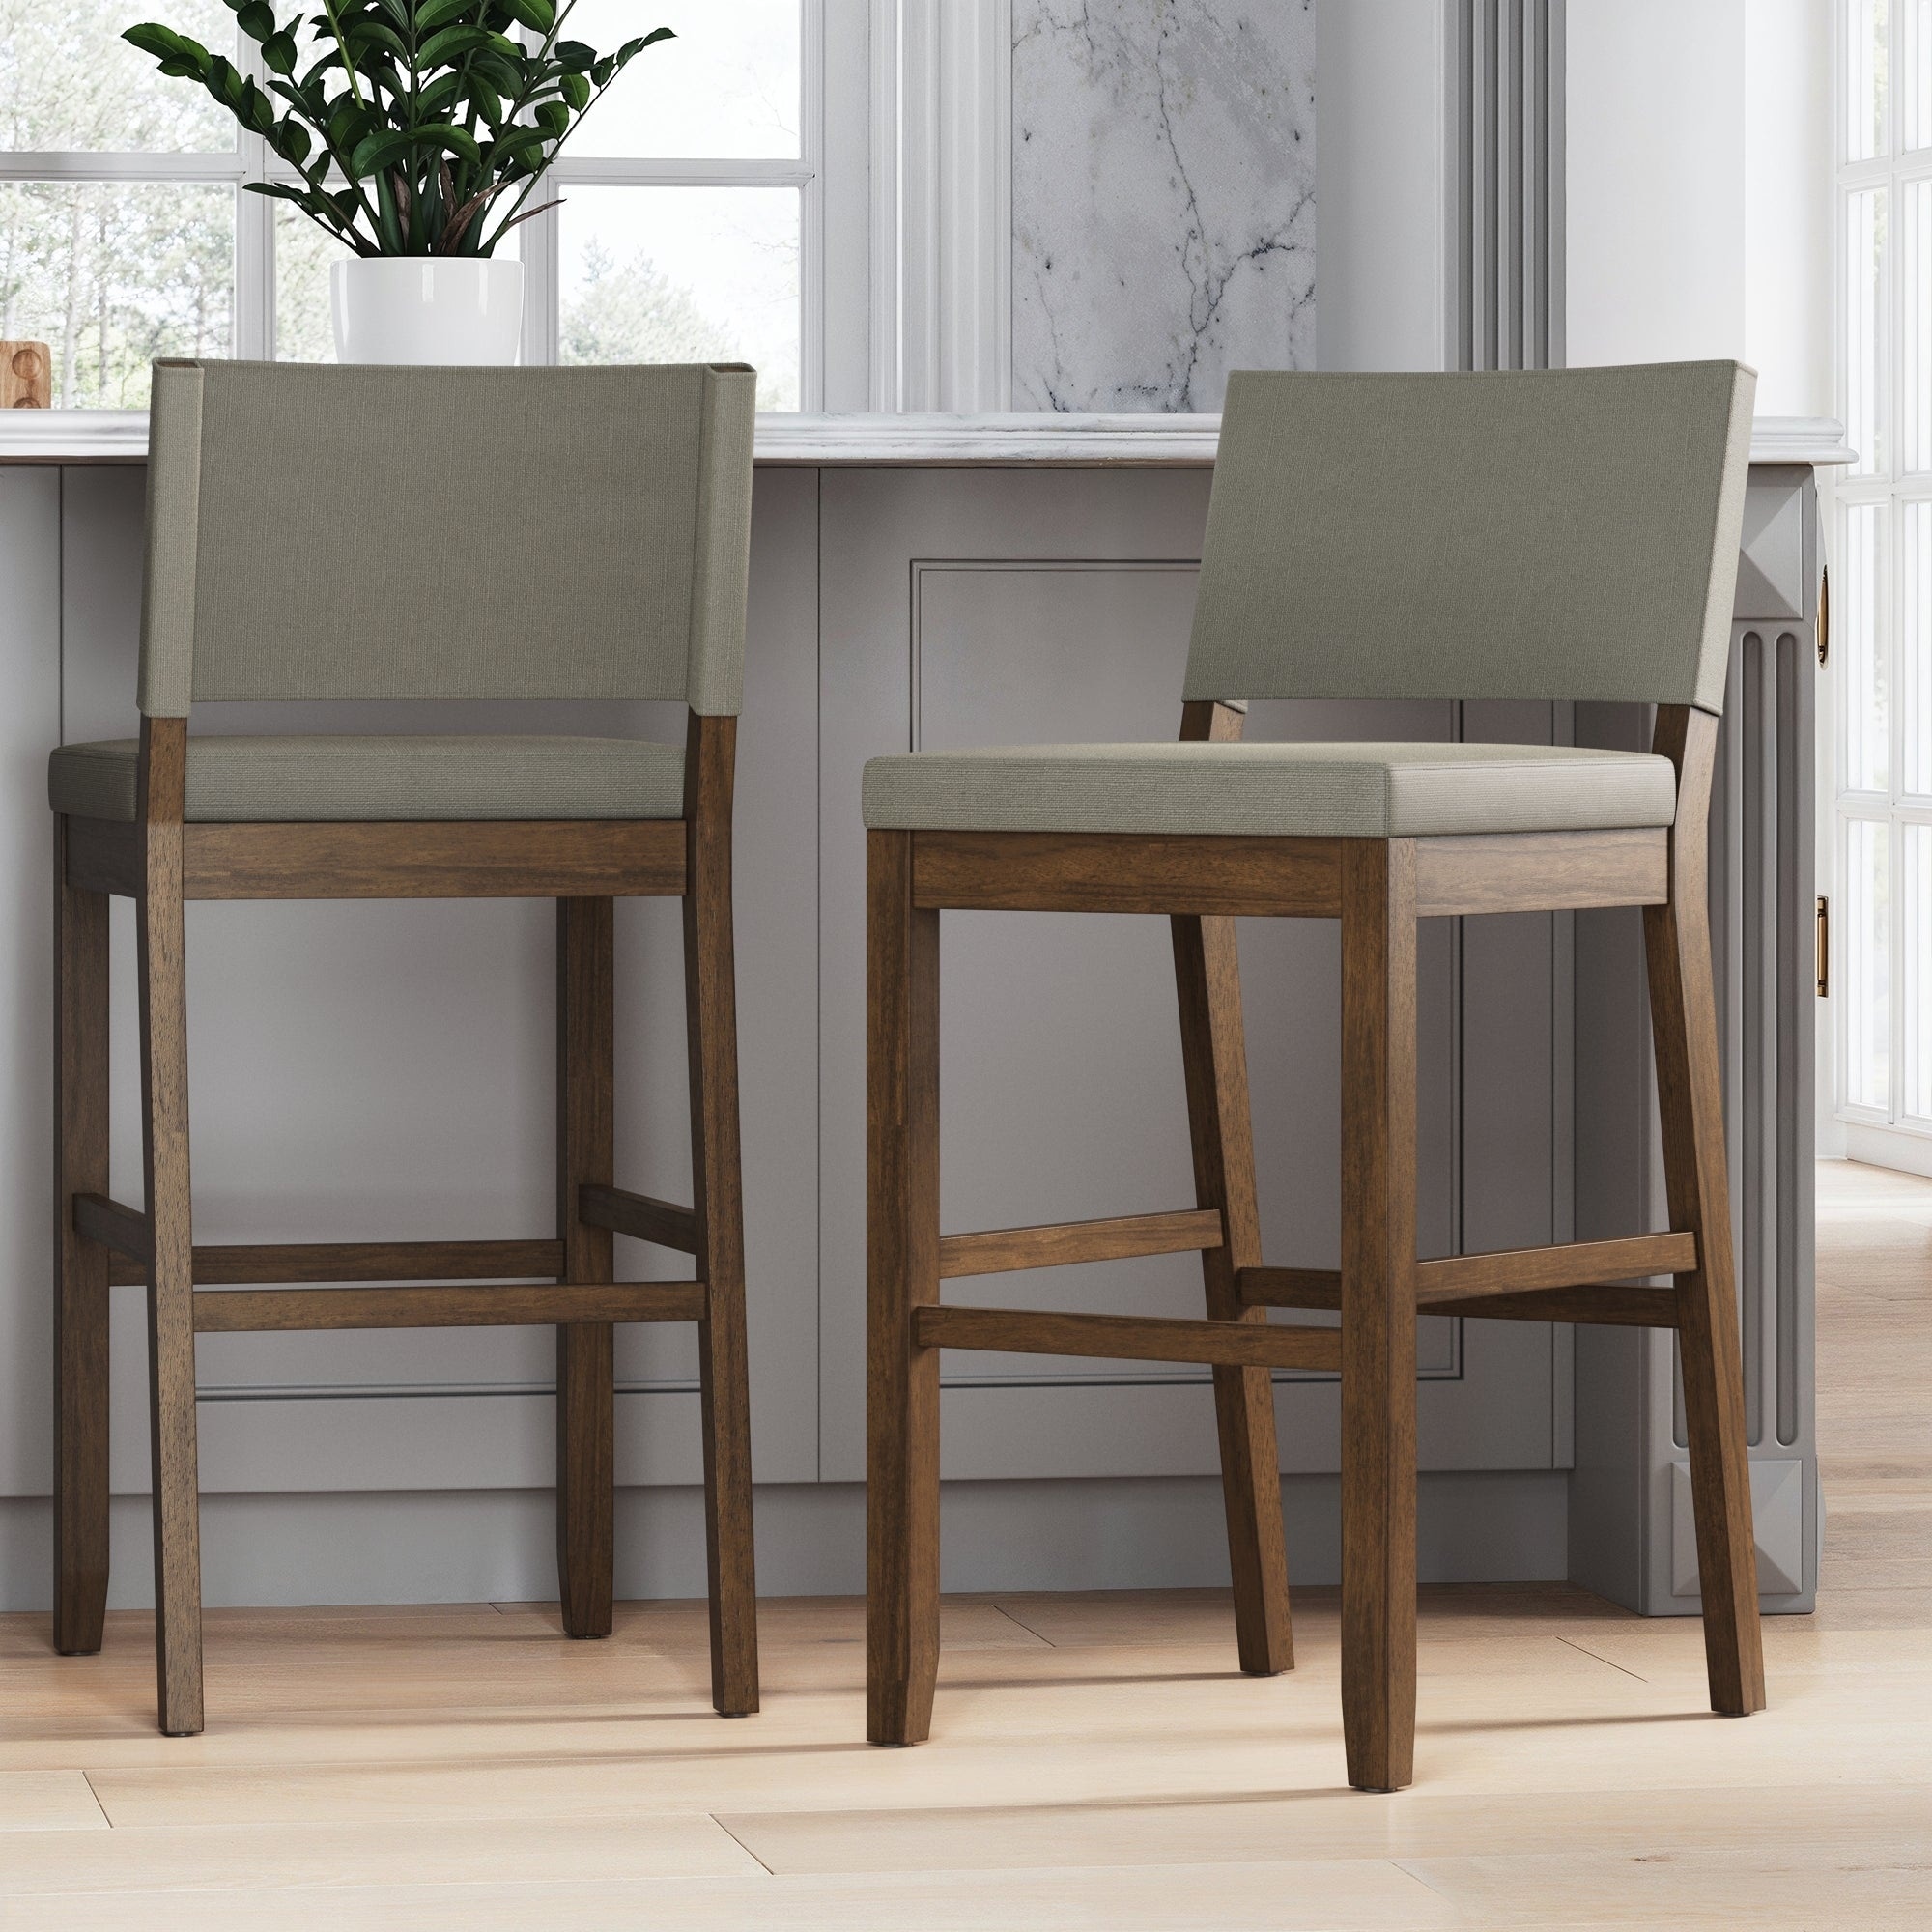 Nathan James Linus Modern Upholstered Counter Height Bar Stool with Back  and Solid Rubberwood Legs in a Wire-Brushed Light Brown Finish, Natural